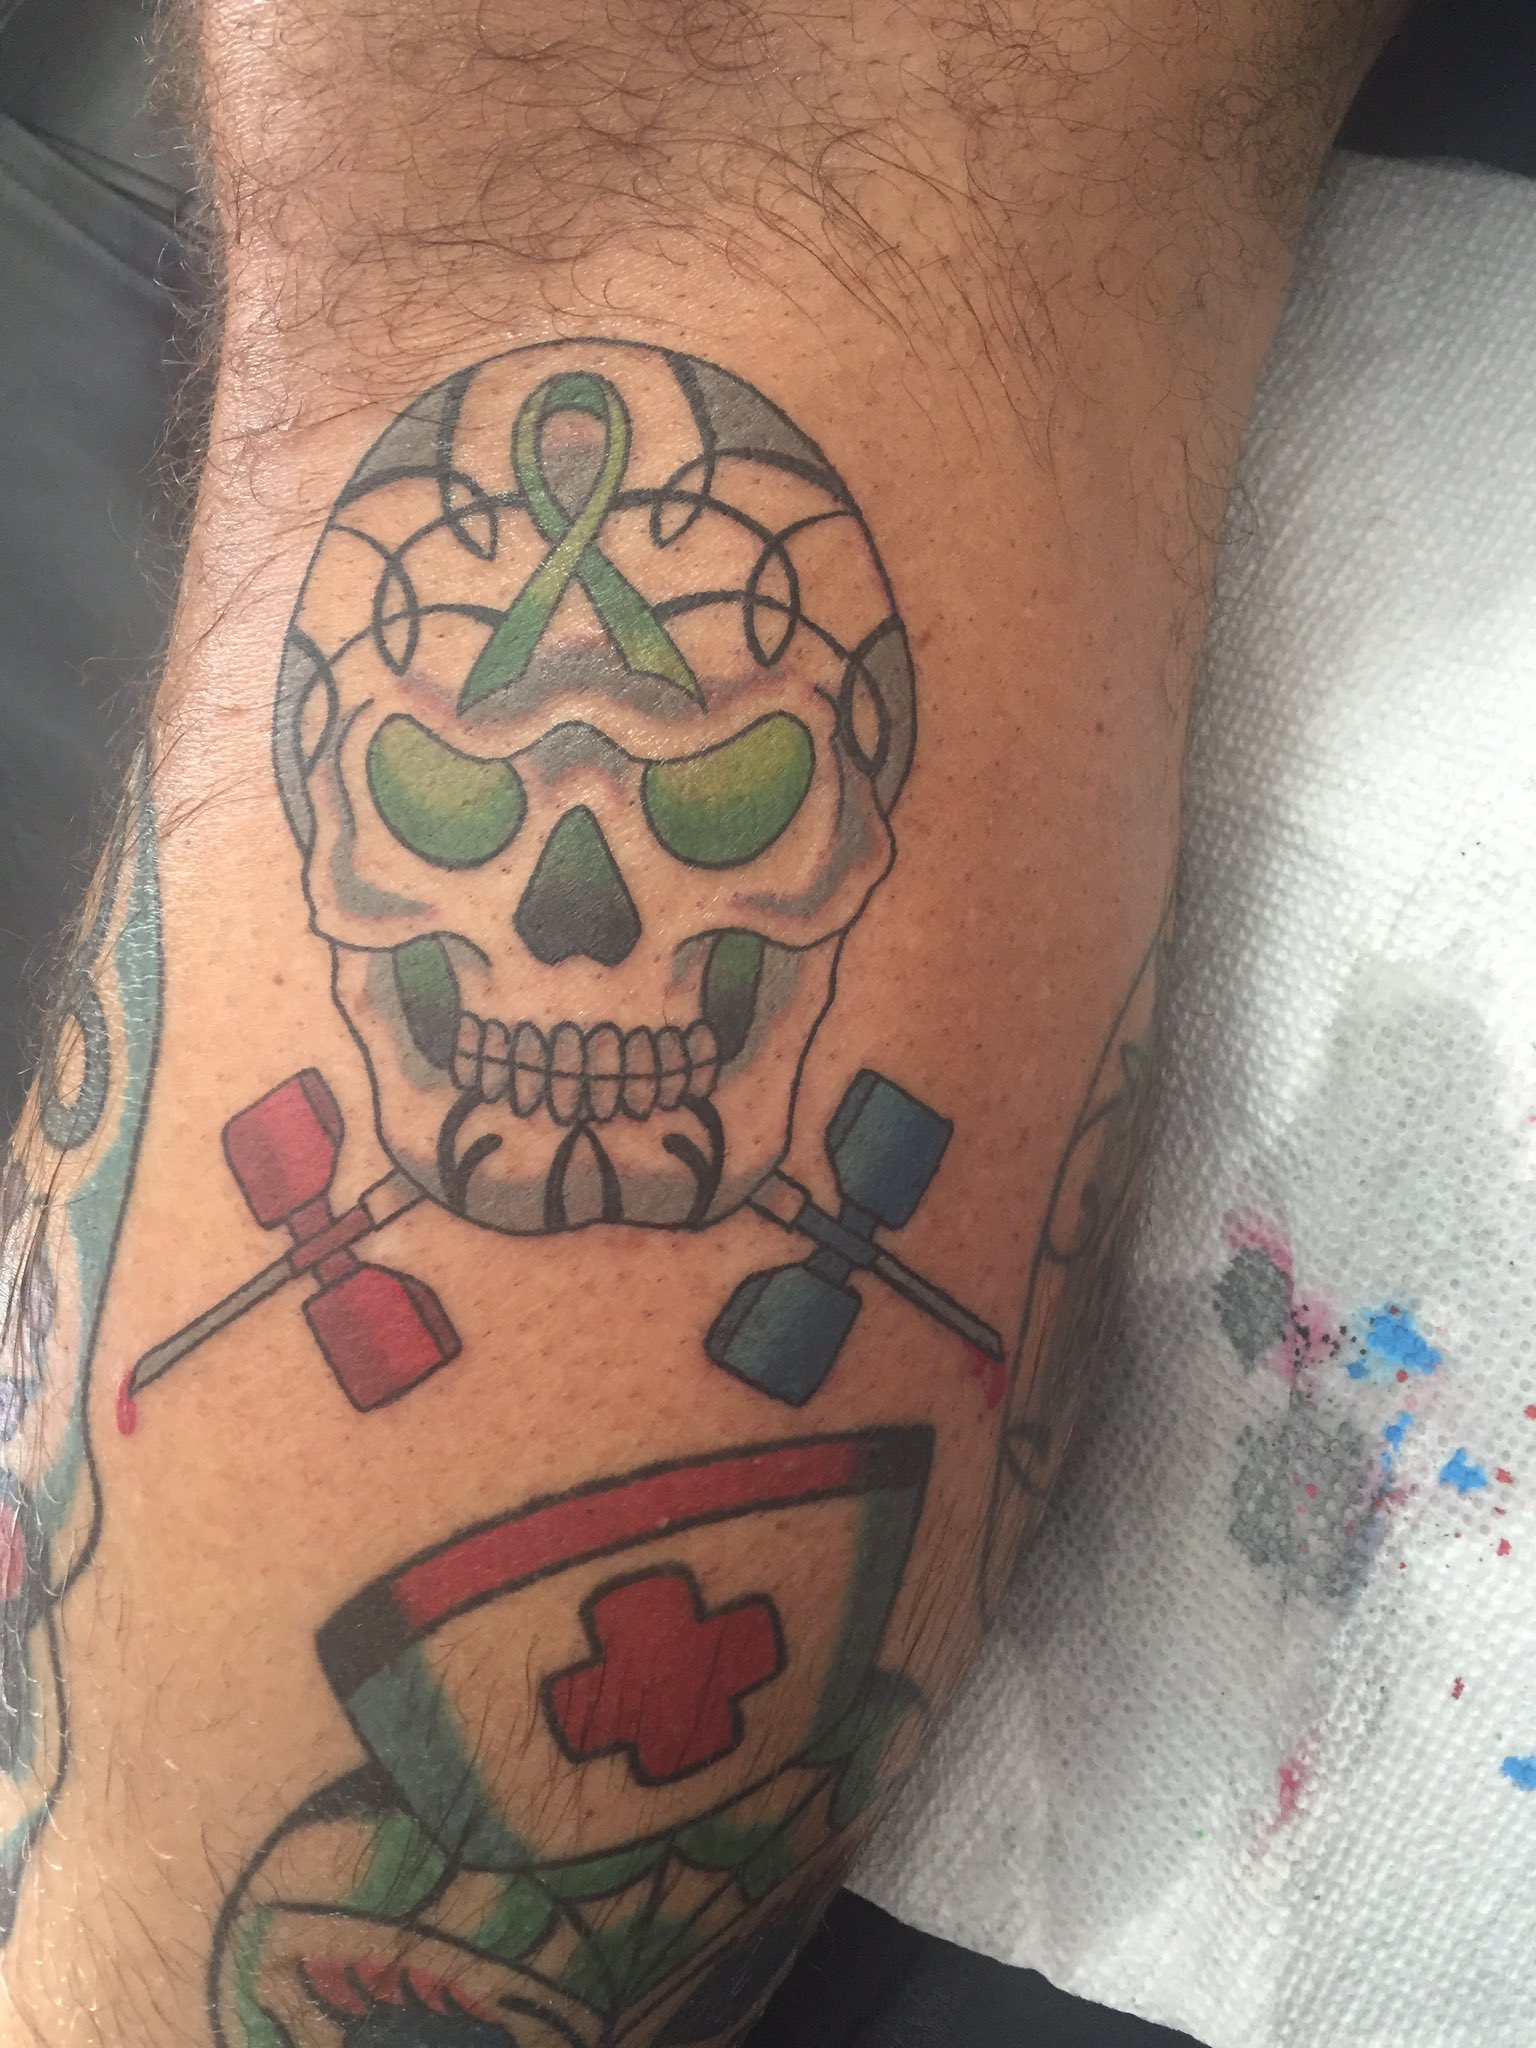 Infected Tattoo Stages: Signs, Treatment, What to Expect